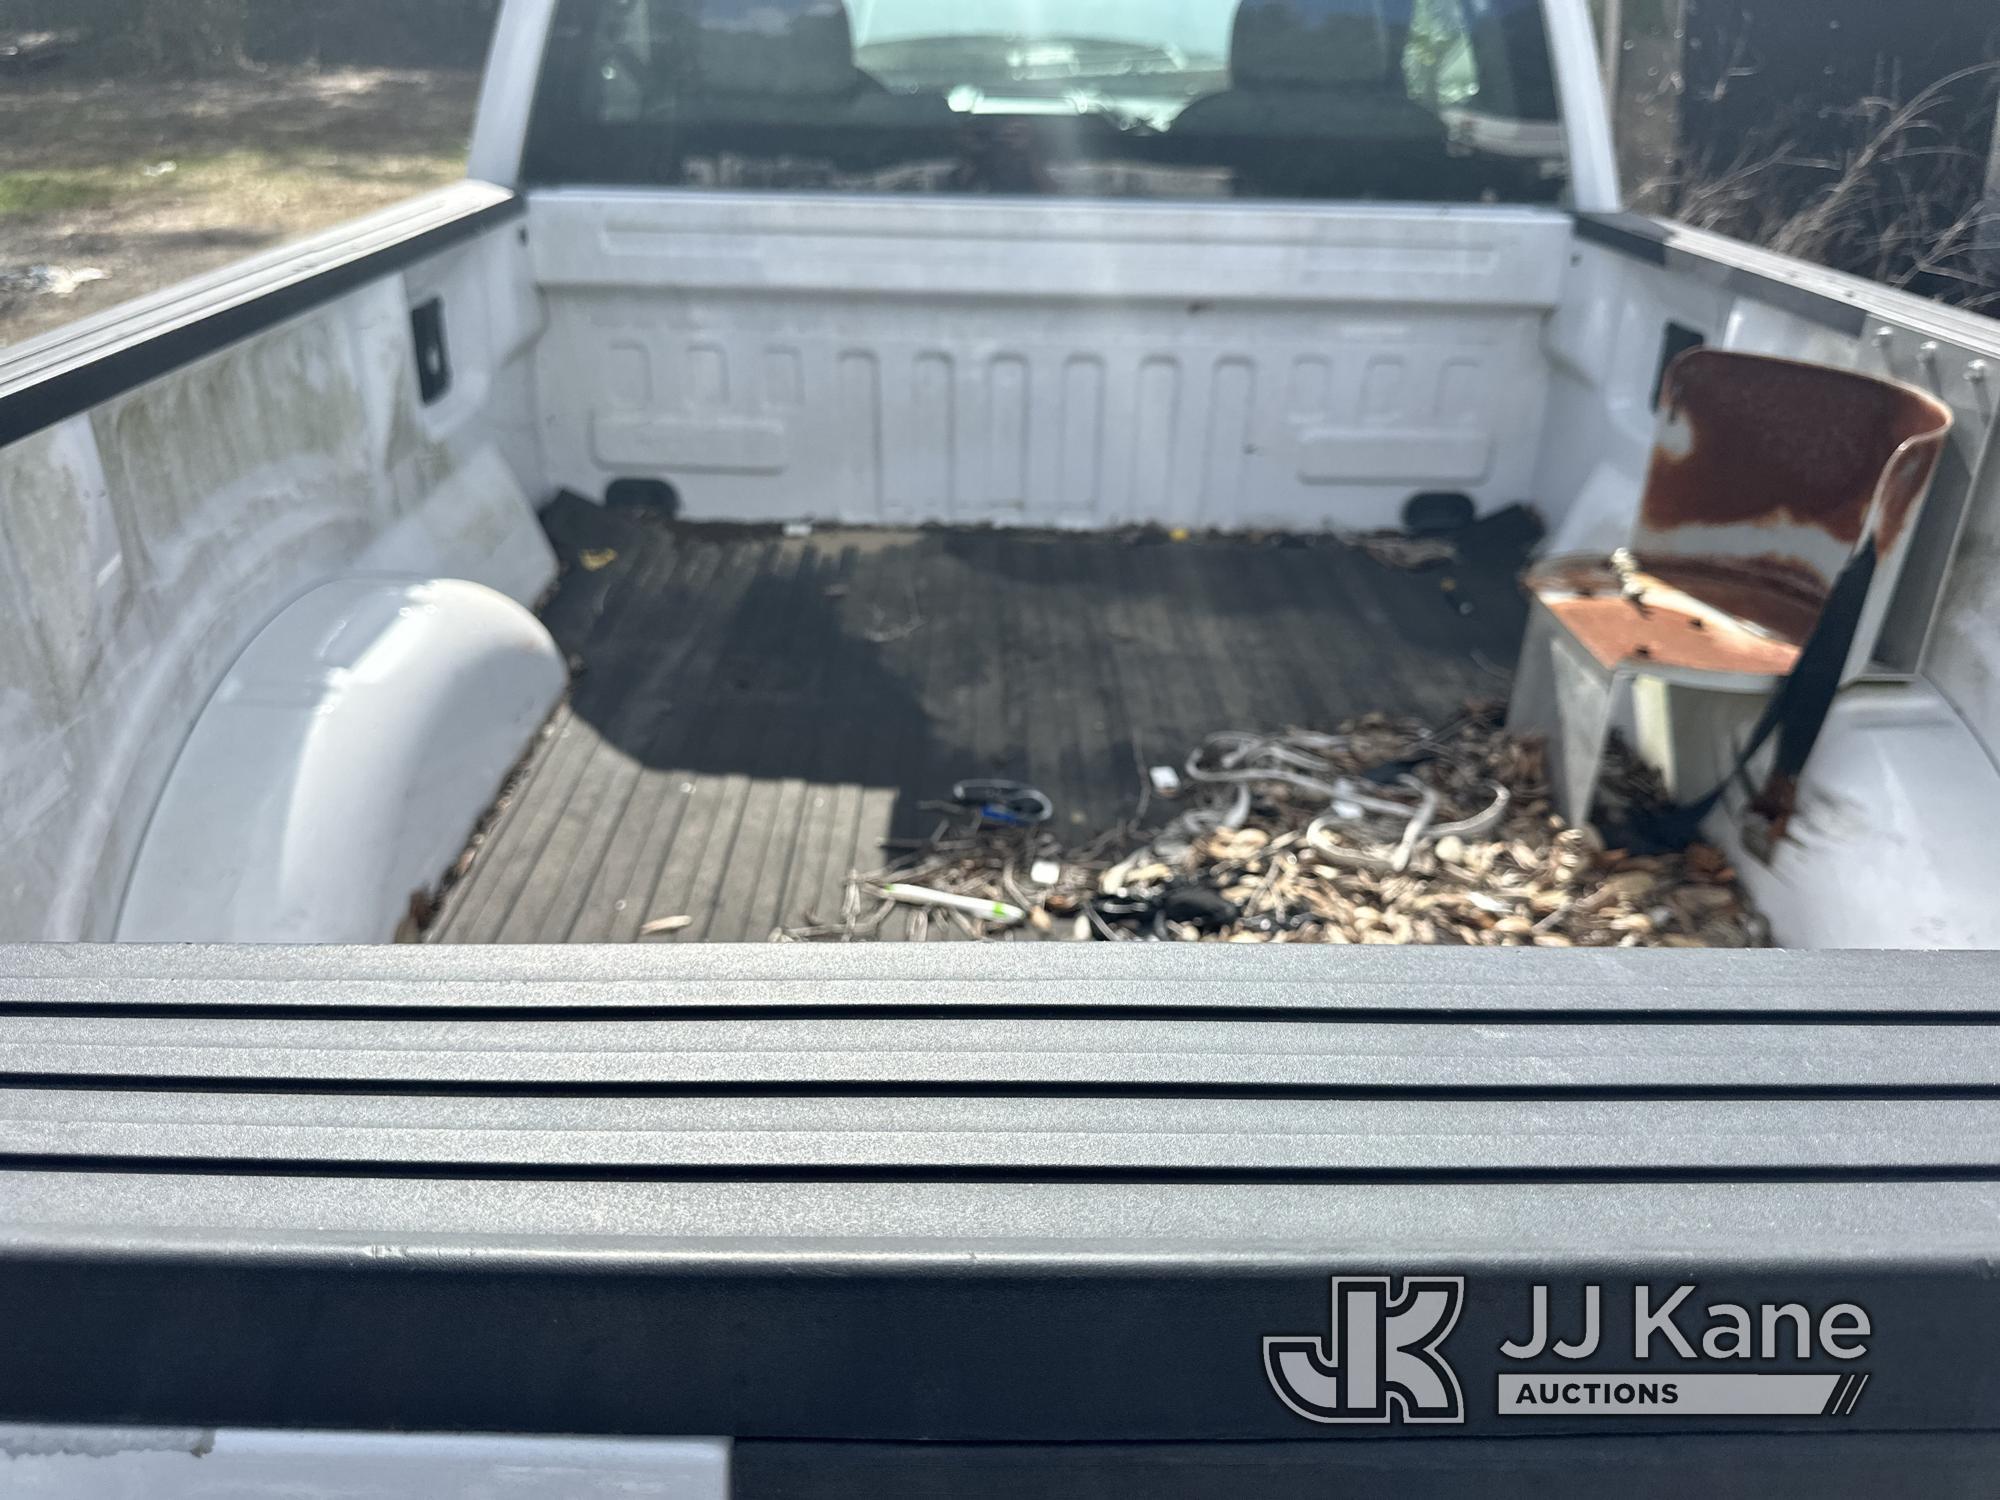 (Ocala, FL) 2018 Ford F150 4x4 Pickup Truck Duke Unit) (Not Running, Condition Unknown) (Seller Stat